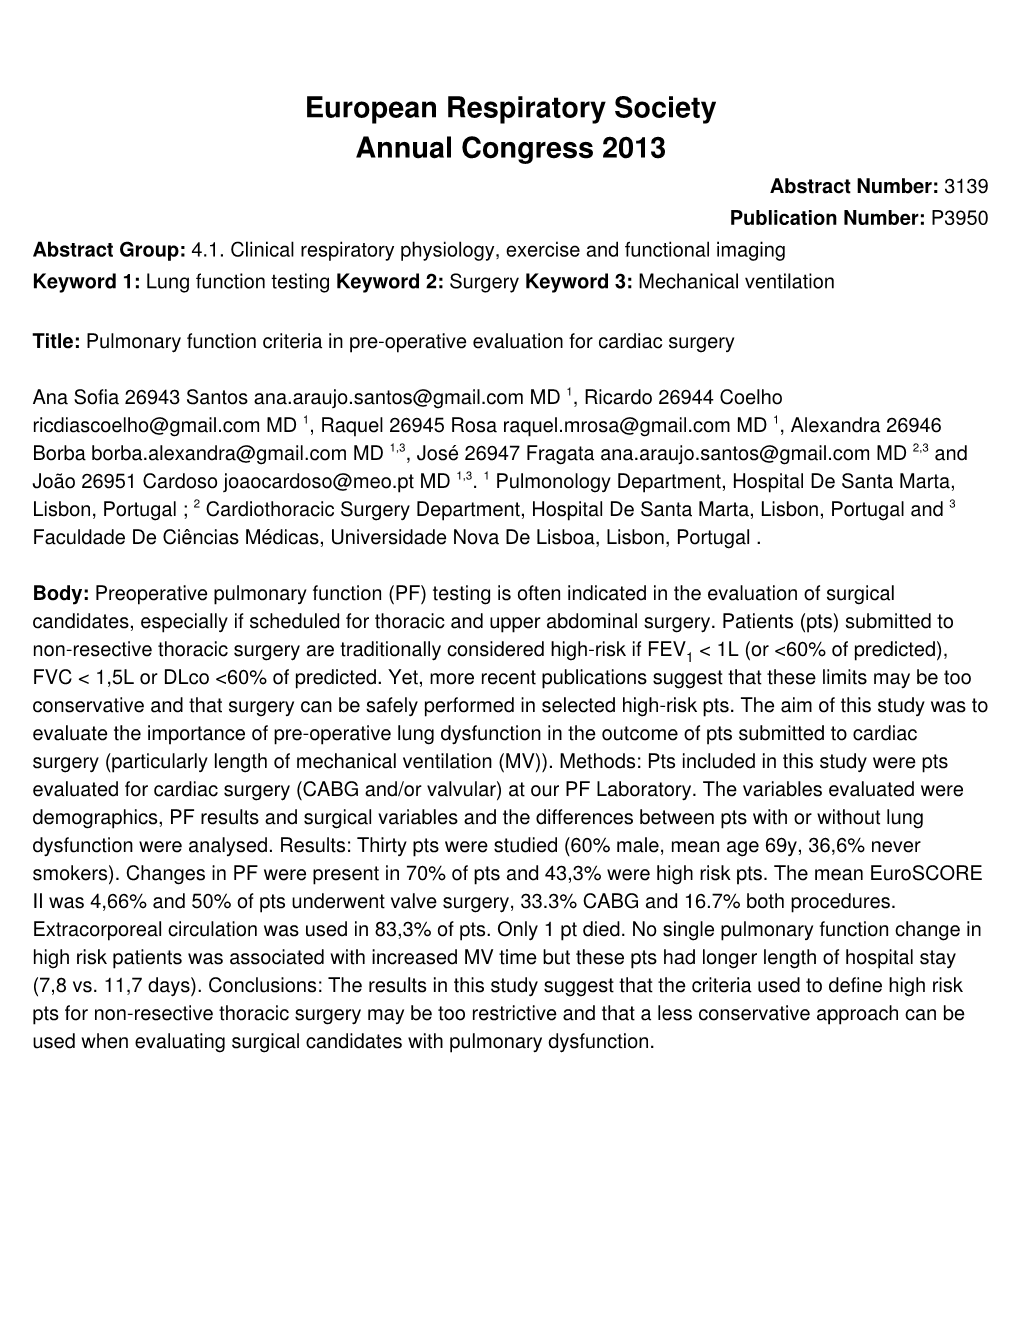 European Respiratory Society Annual Congress 2013 Abstract Number: 3139 Publication Number: P3950 Abstract Group: 4.1